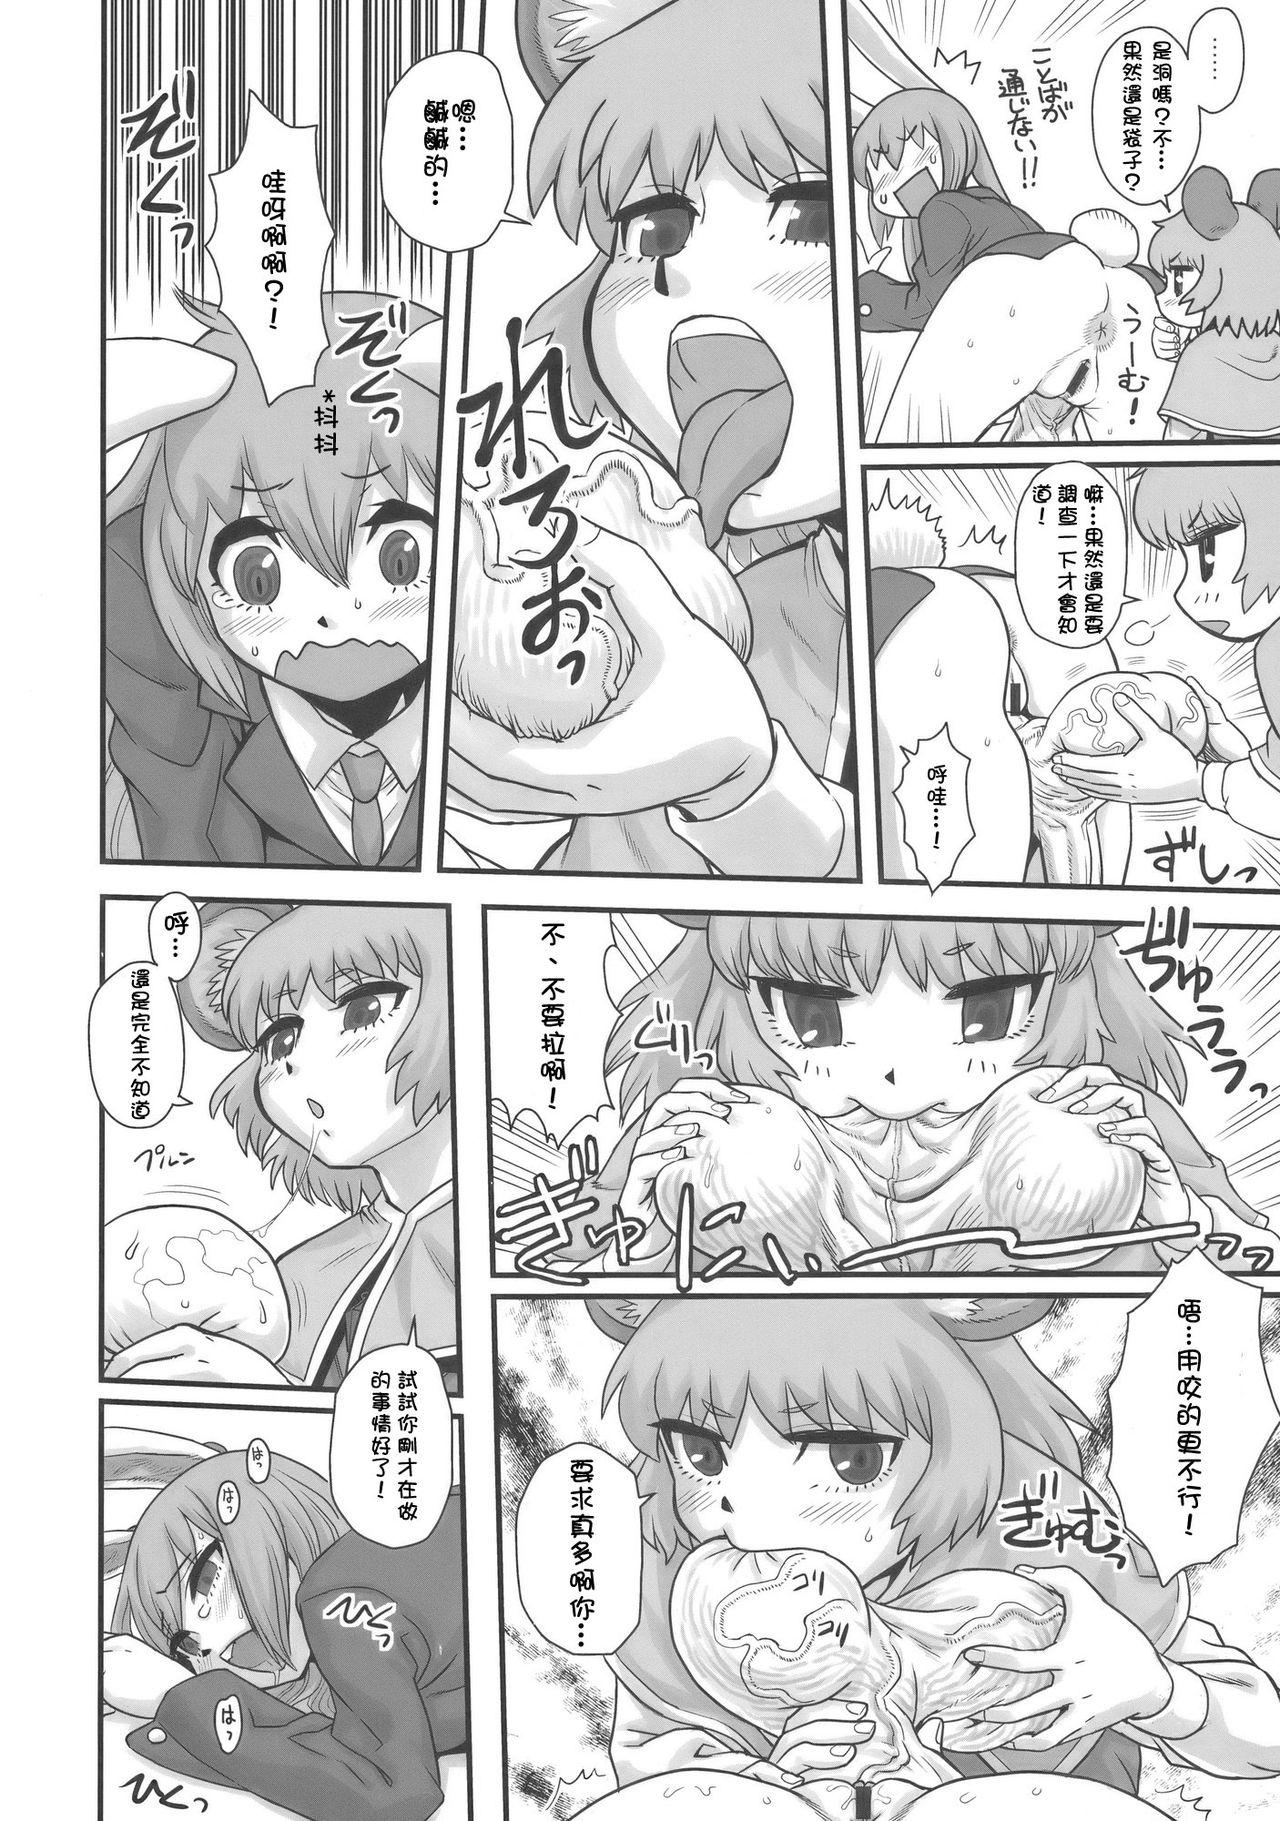 Behind Lunatic Udon - Touhou project Gay Skinny - Page 8